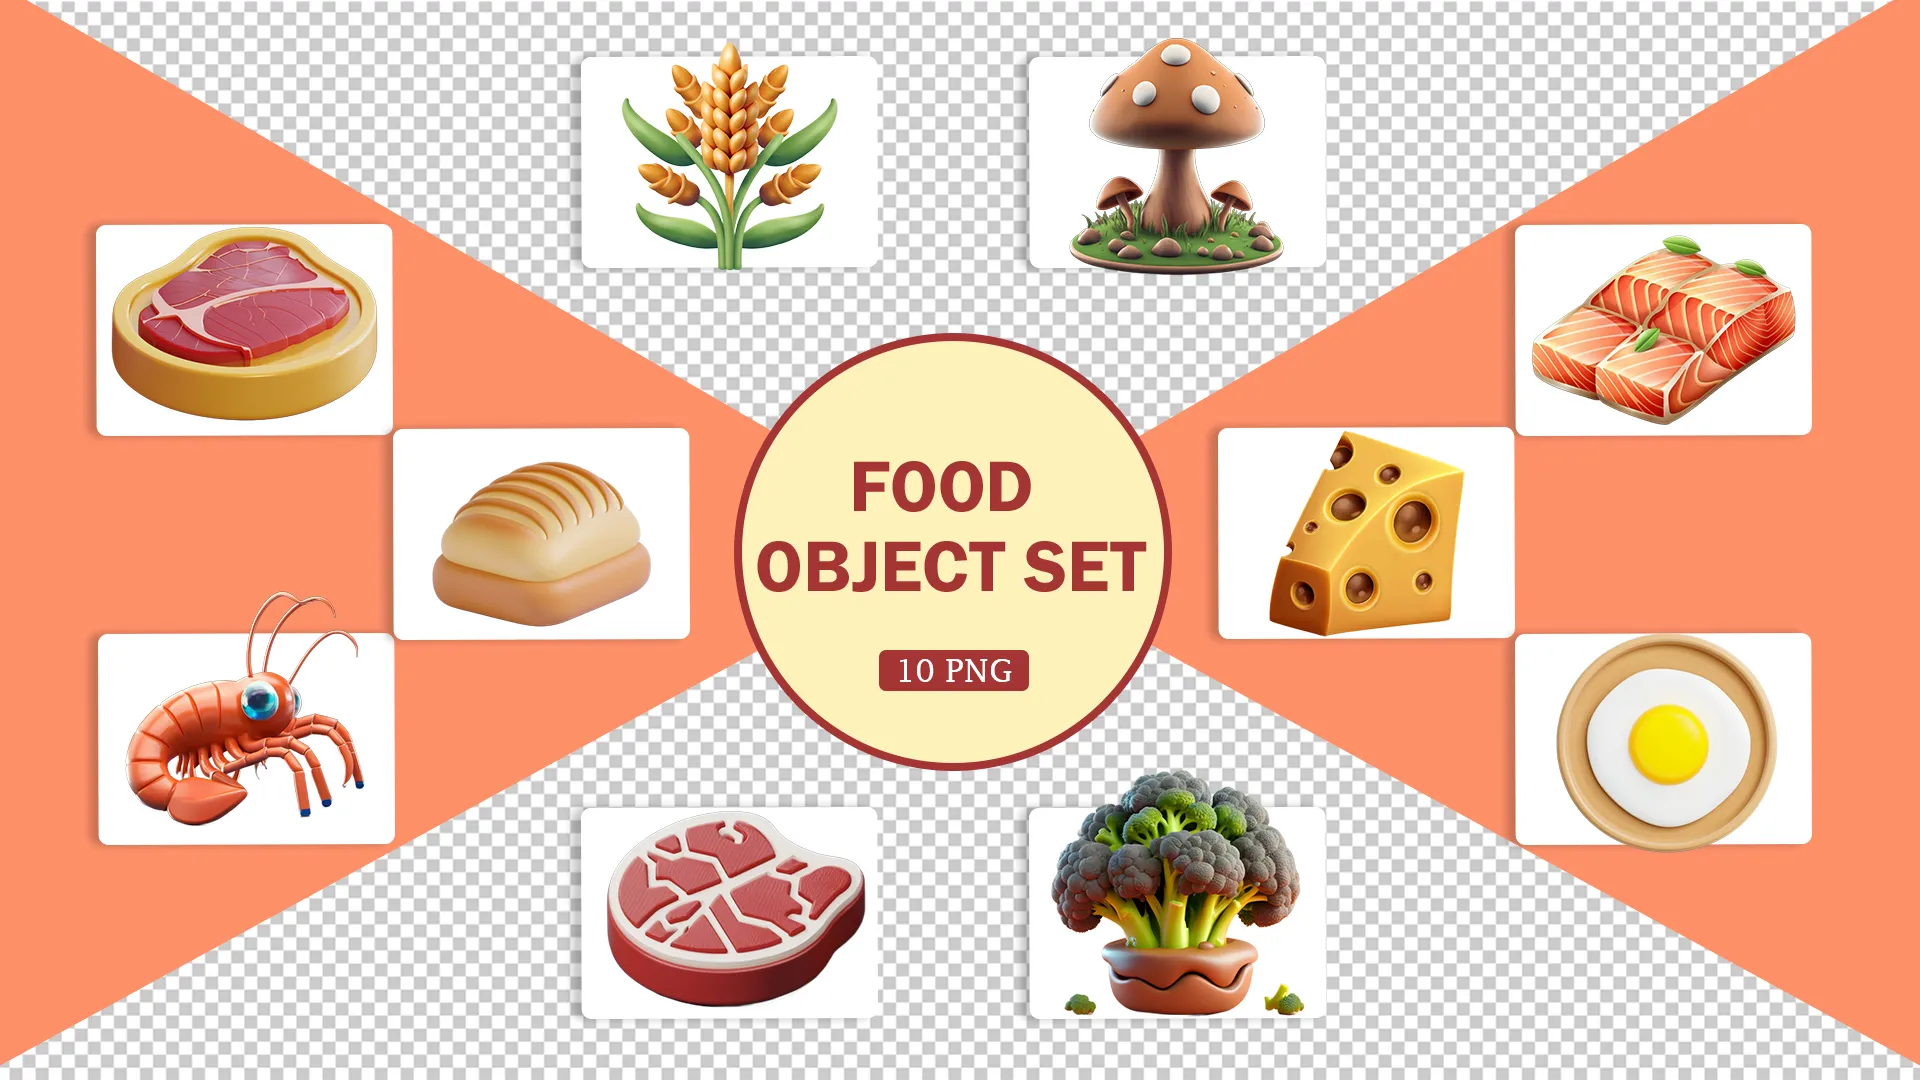 Bakery Fresh 3D Pack with Bread and Pastries image